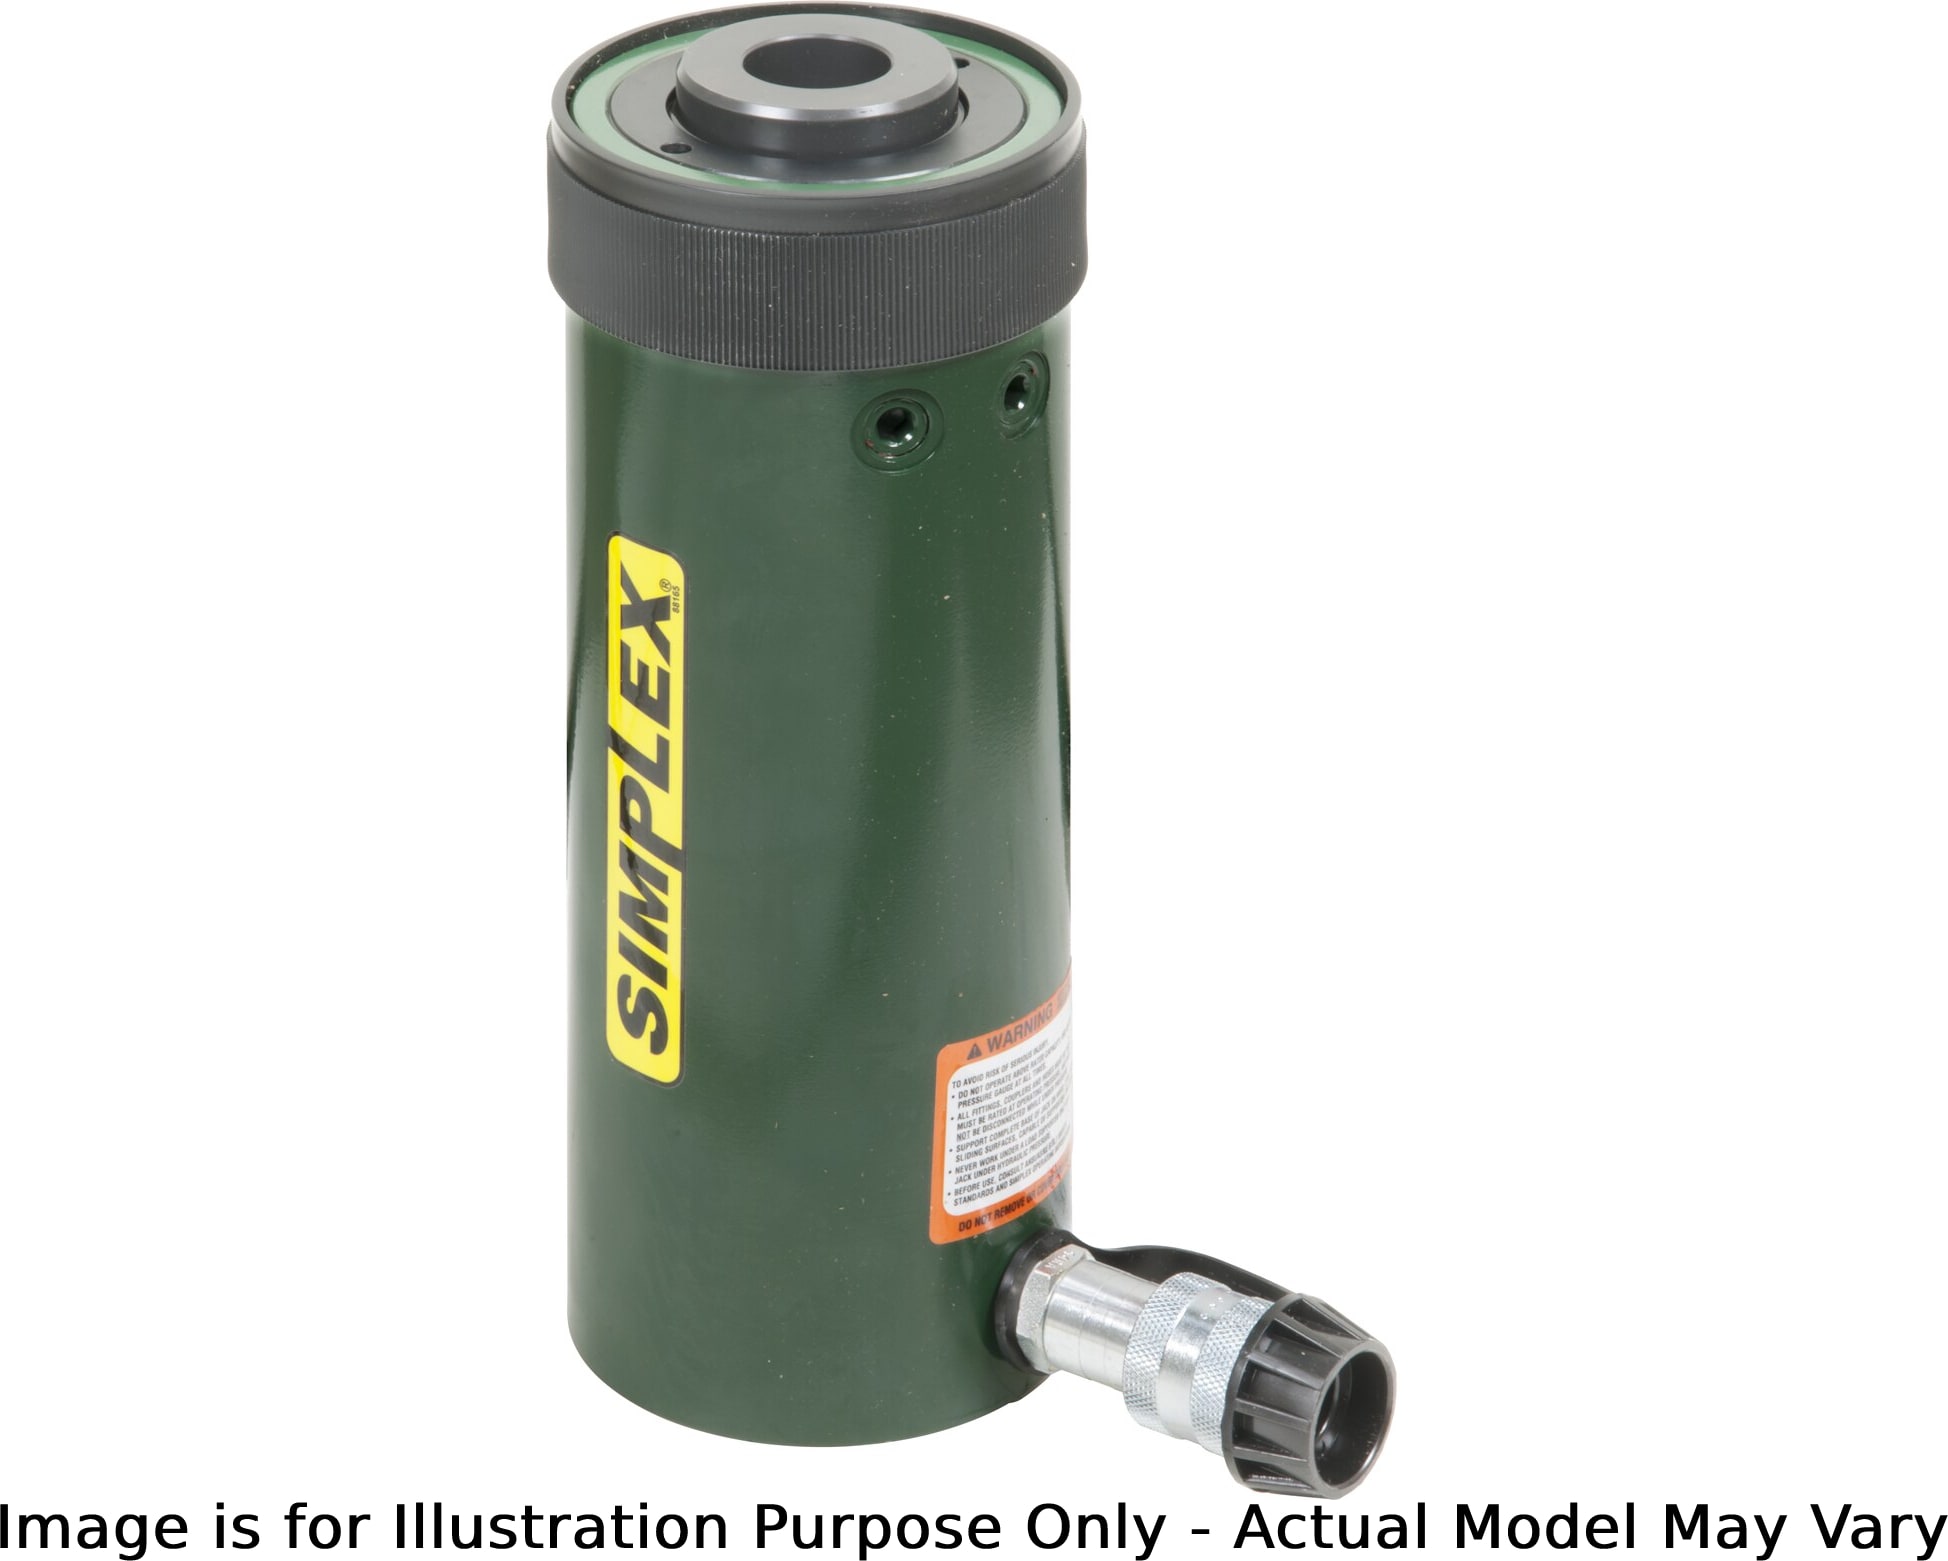 Enerpac RC1003A - Center Hole Hydraulic Cylinder, 100 Tons Capacity, 3-in Stroke, Single Acting